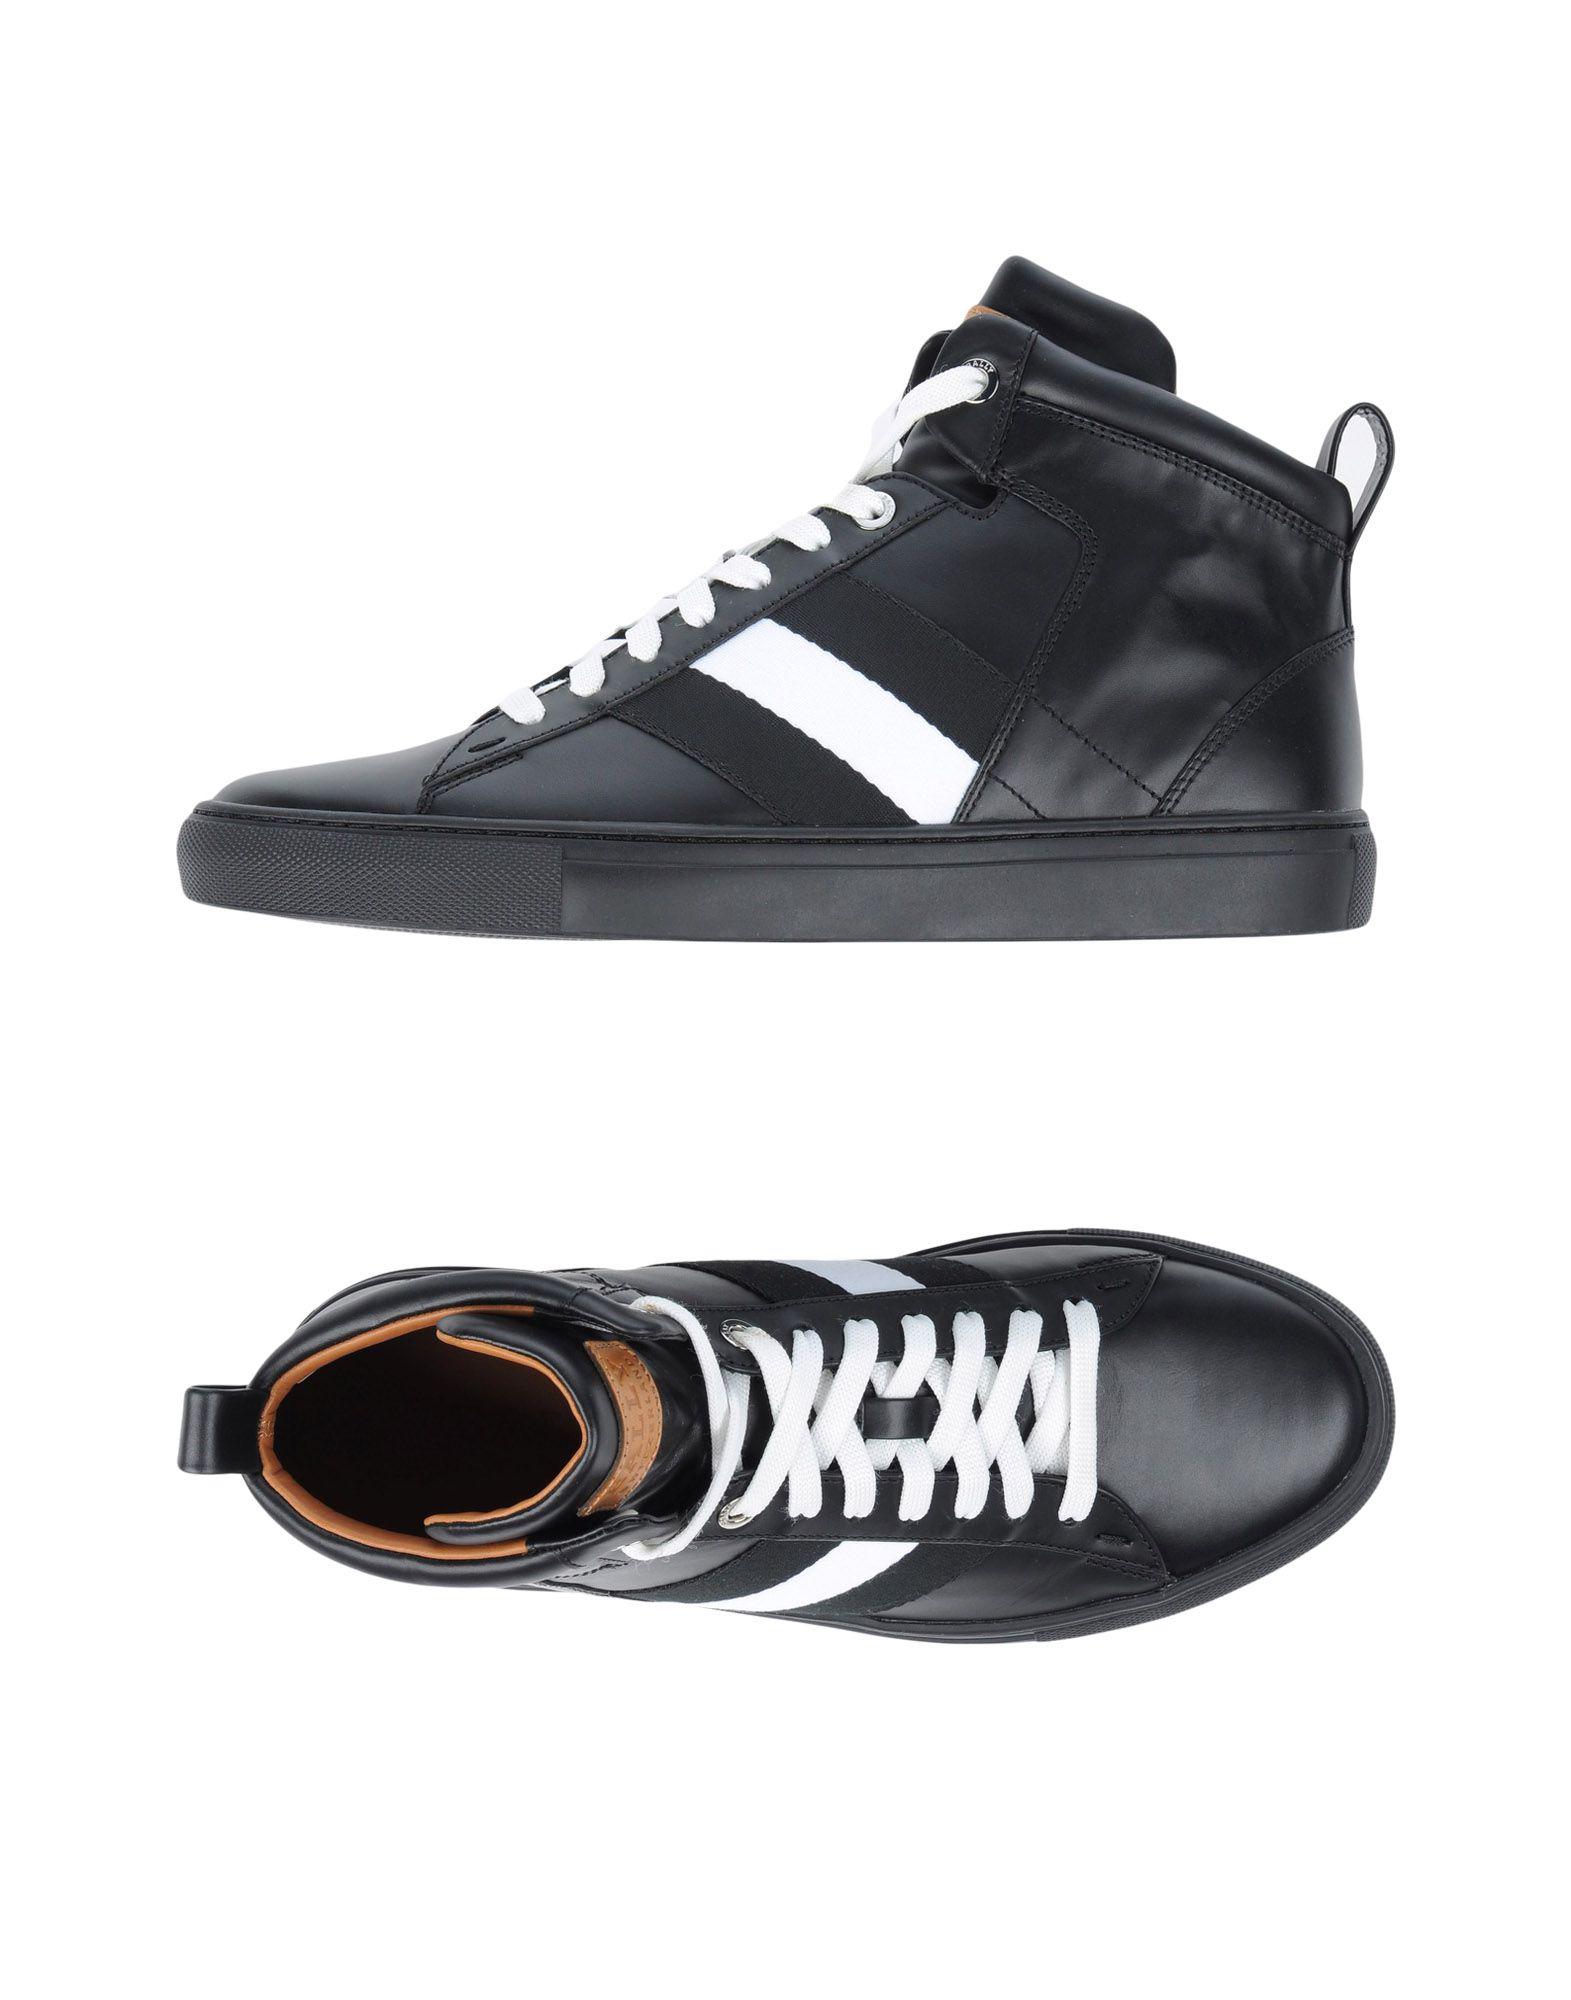 Bally Leather High-tops & Sneakers in Black for Men - Lyst